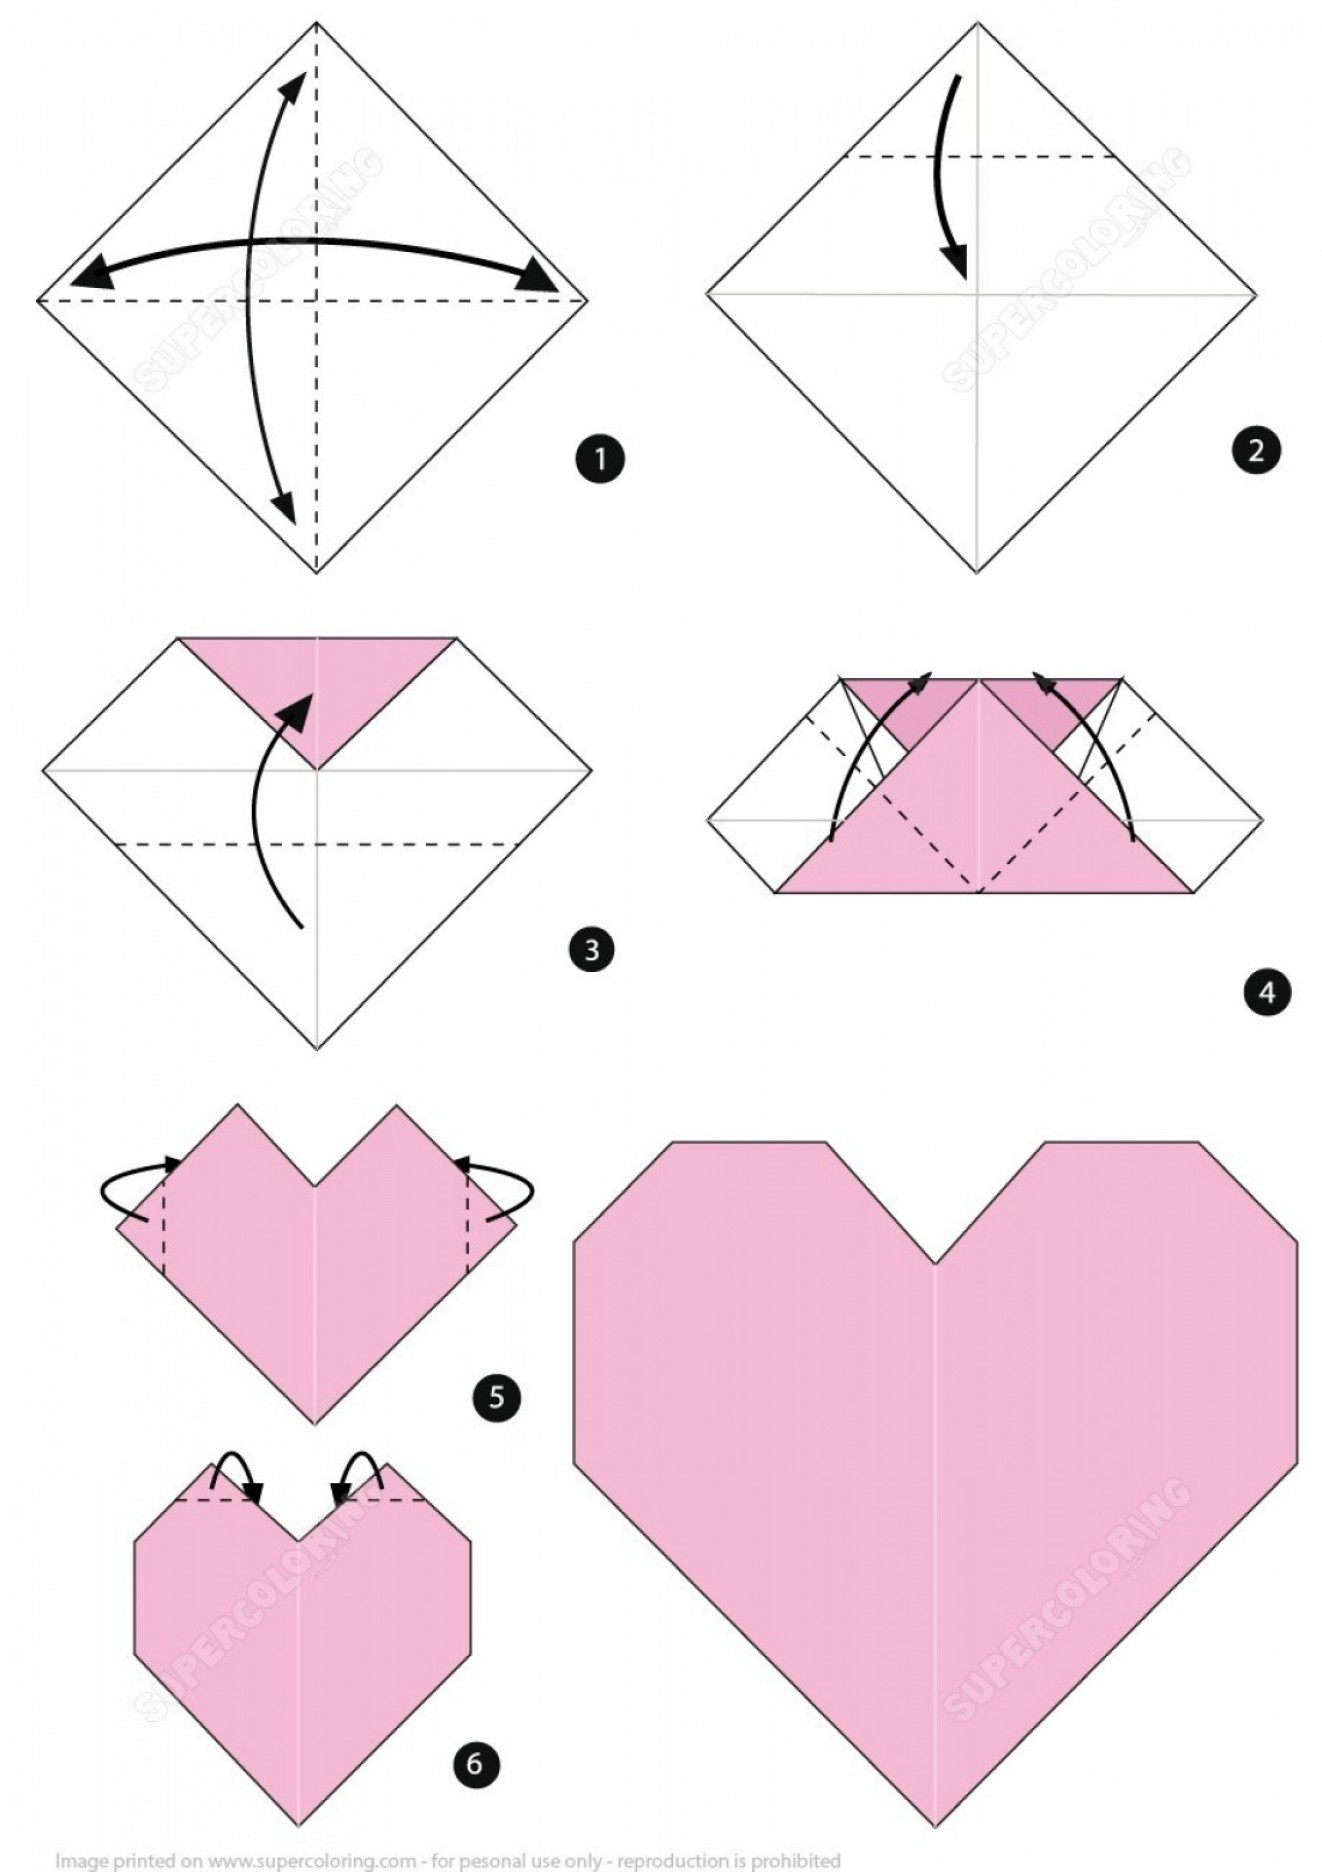 How To Make An Origami Heart Diy Origami Step Step Origami Heart Instructions Free Printable